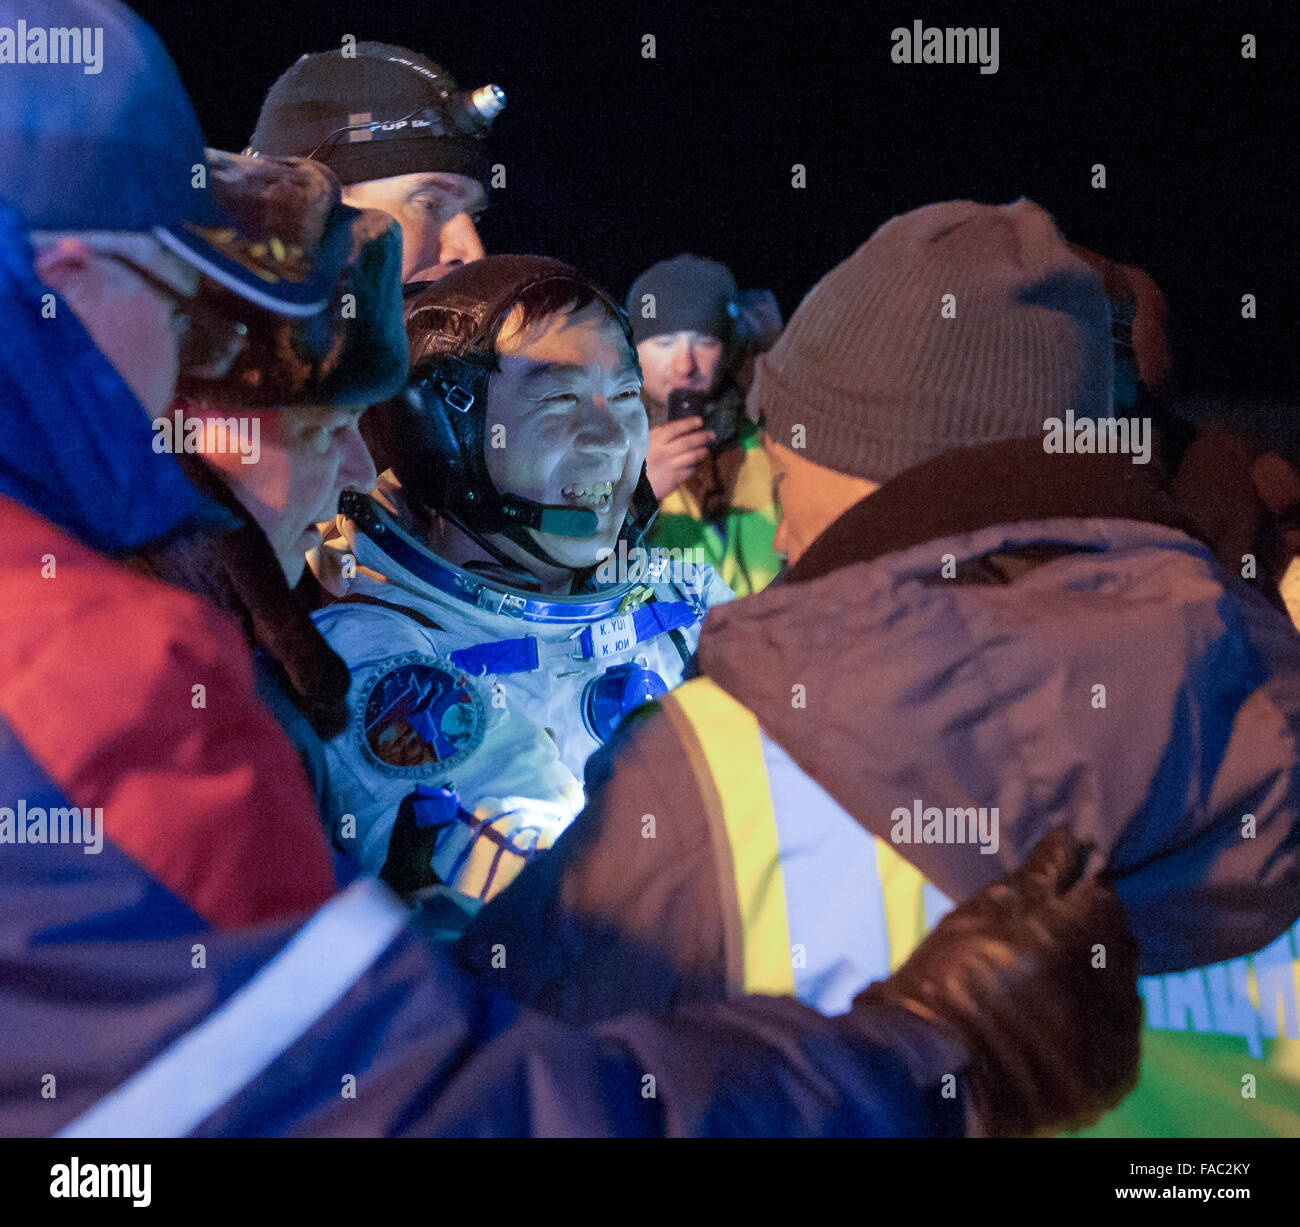 International Space Station Expedition 45 crew member Japanese astronaut Kimya Yui of the Japan Aerospace Exploration Agency is carried to the medical tent moments after landing in a remote area in the Soyuz TMA-17M spacecraft December 11, 2015 near Zhezkazgan, Kazakhstan. The crew is returning after 141 days onboard the International Space Station. Stock Photo